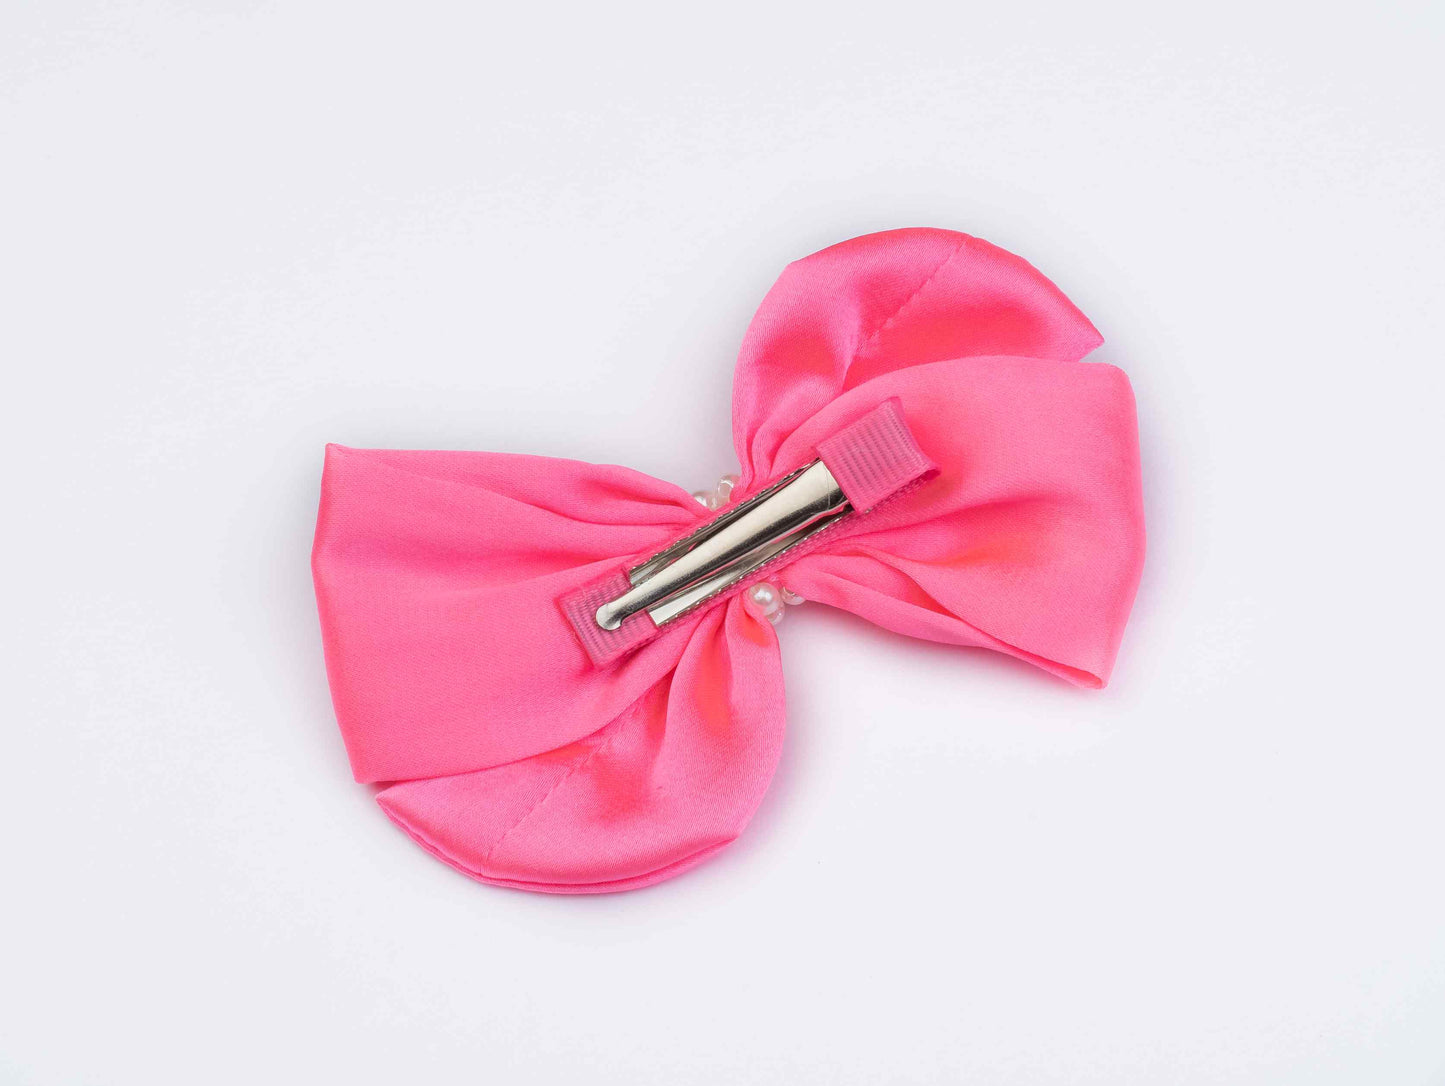 Pearl Detailed Cute Satin Bow on Alligator clip.